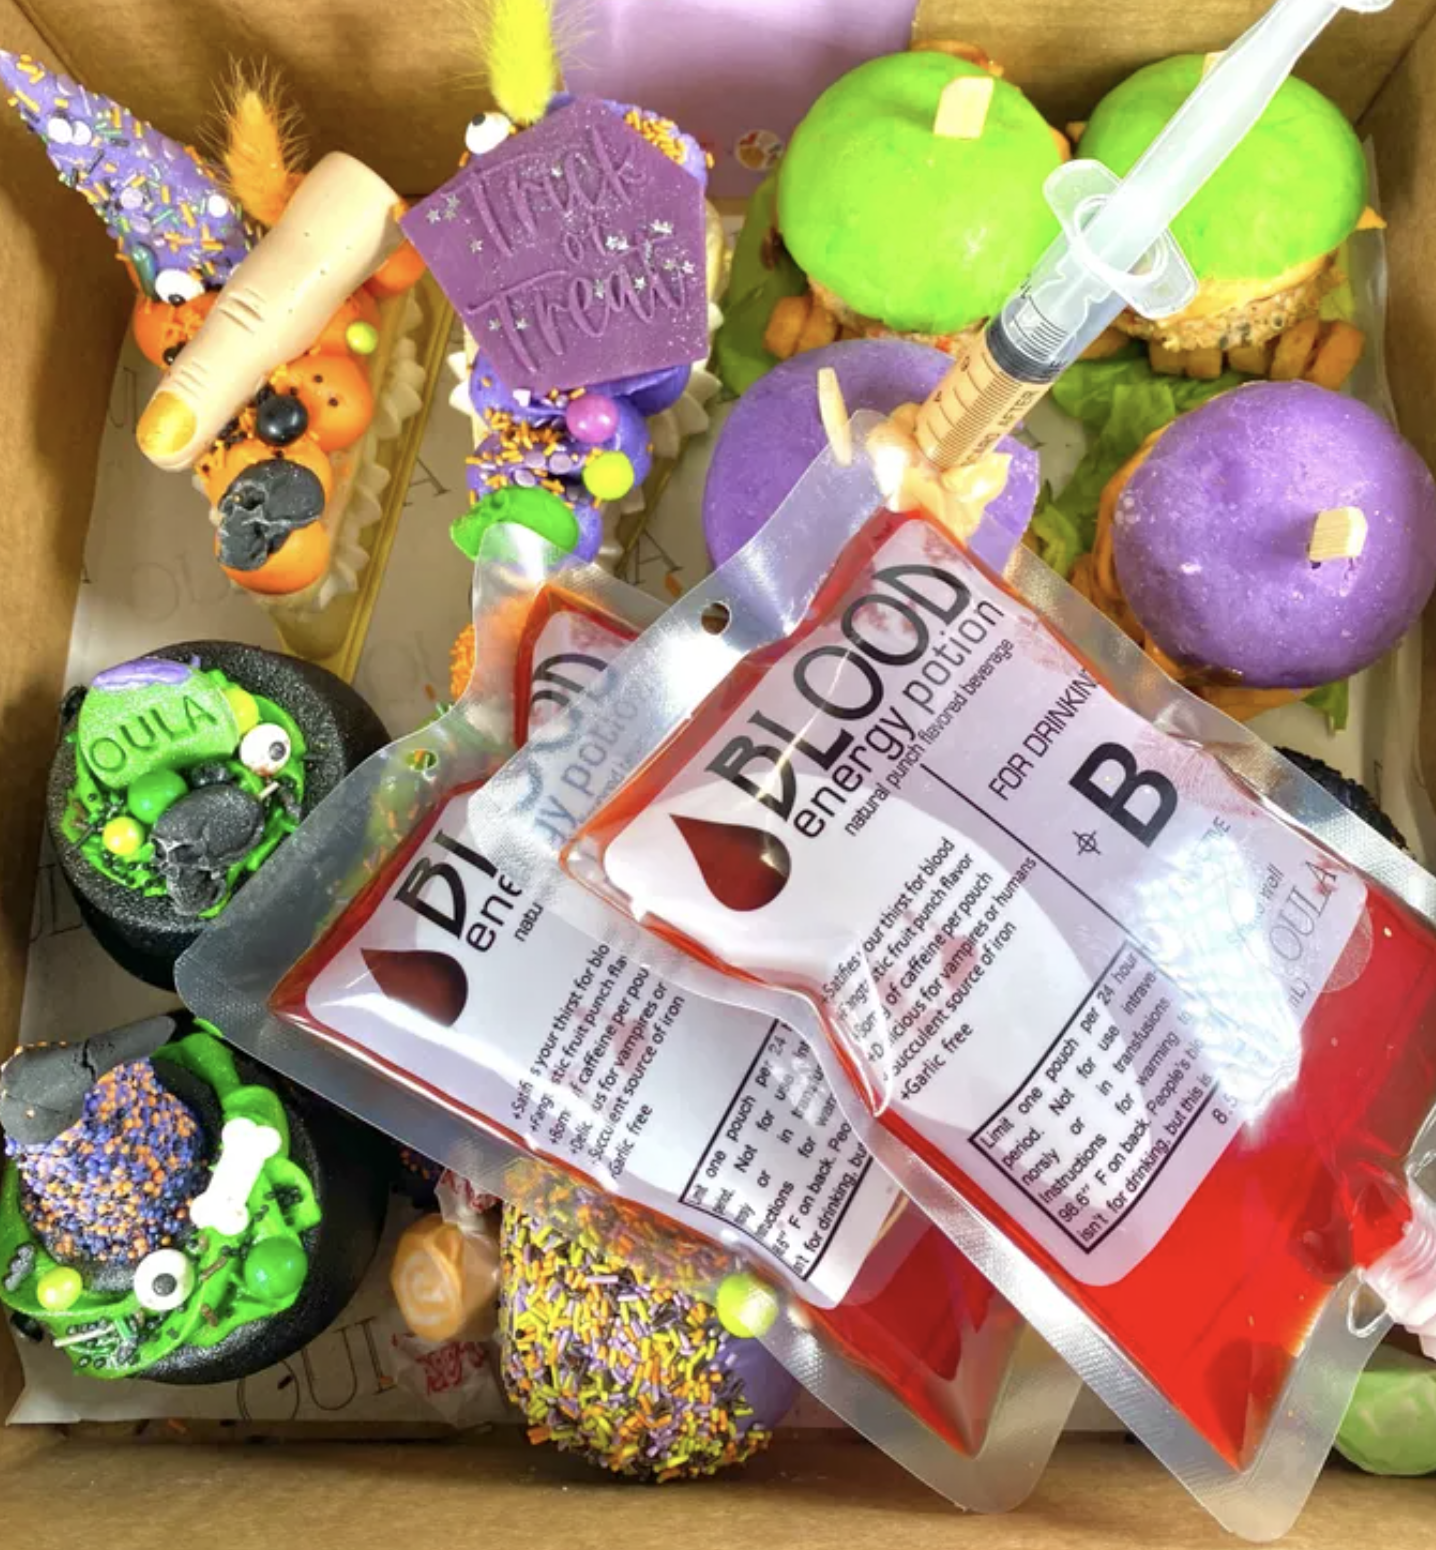 Oula Halloween box with cakes, sliders and fake blood